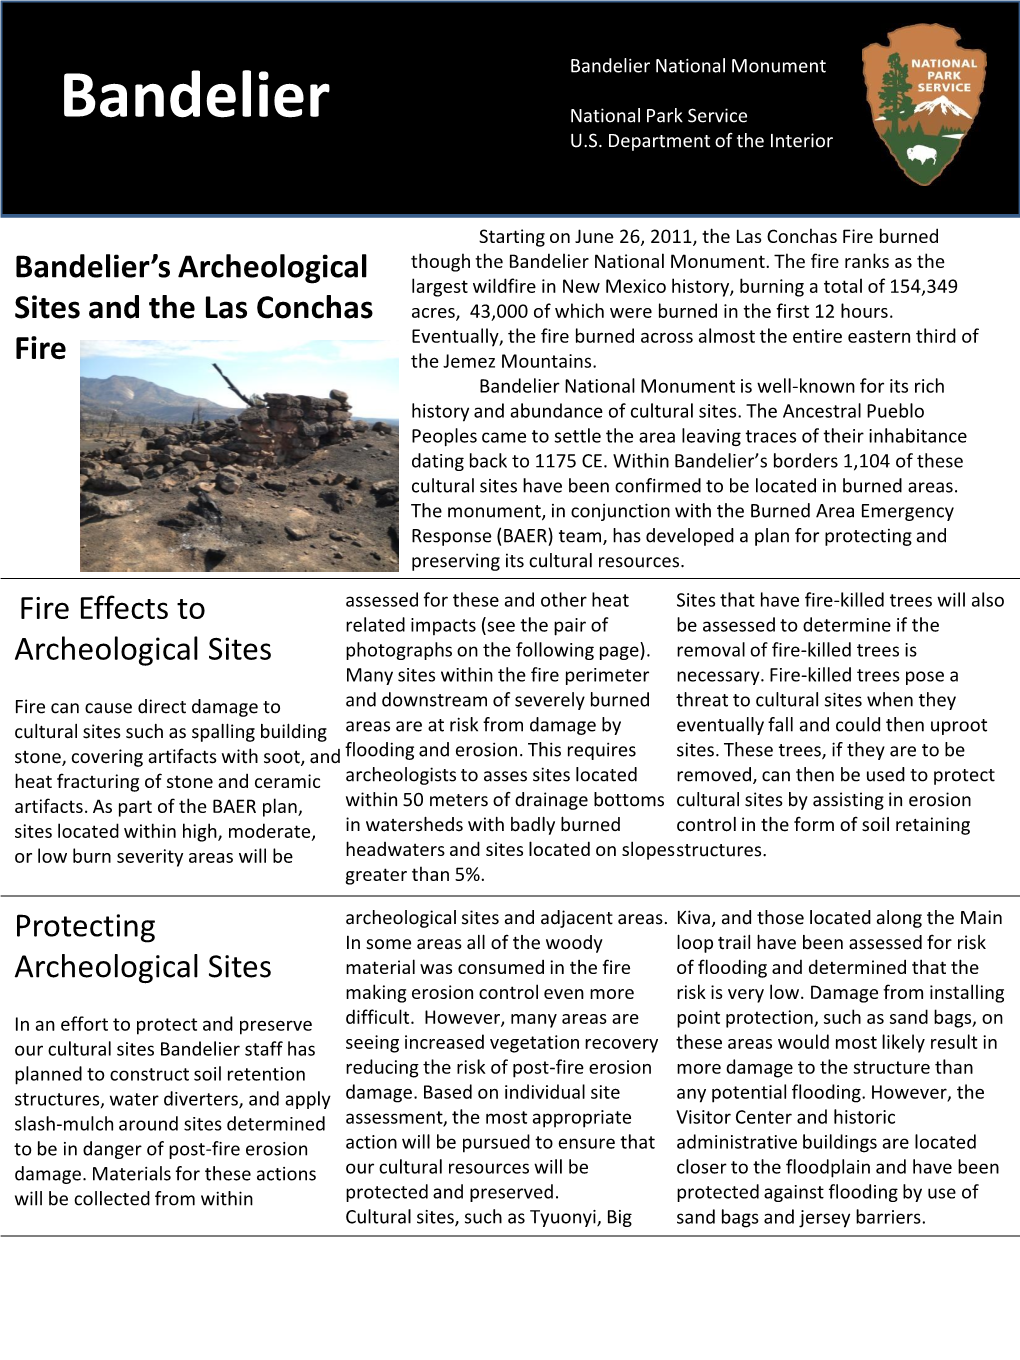 The Effects of Las Conchas Fire on Archeological Sites